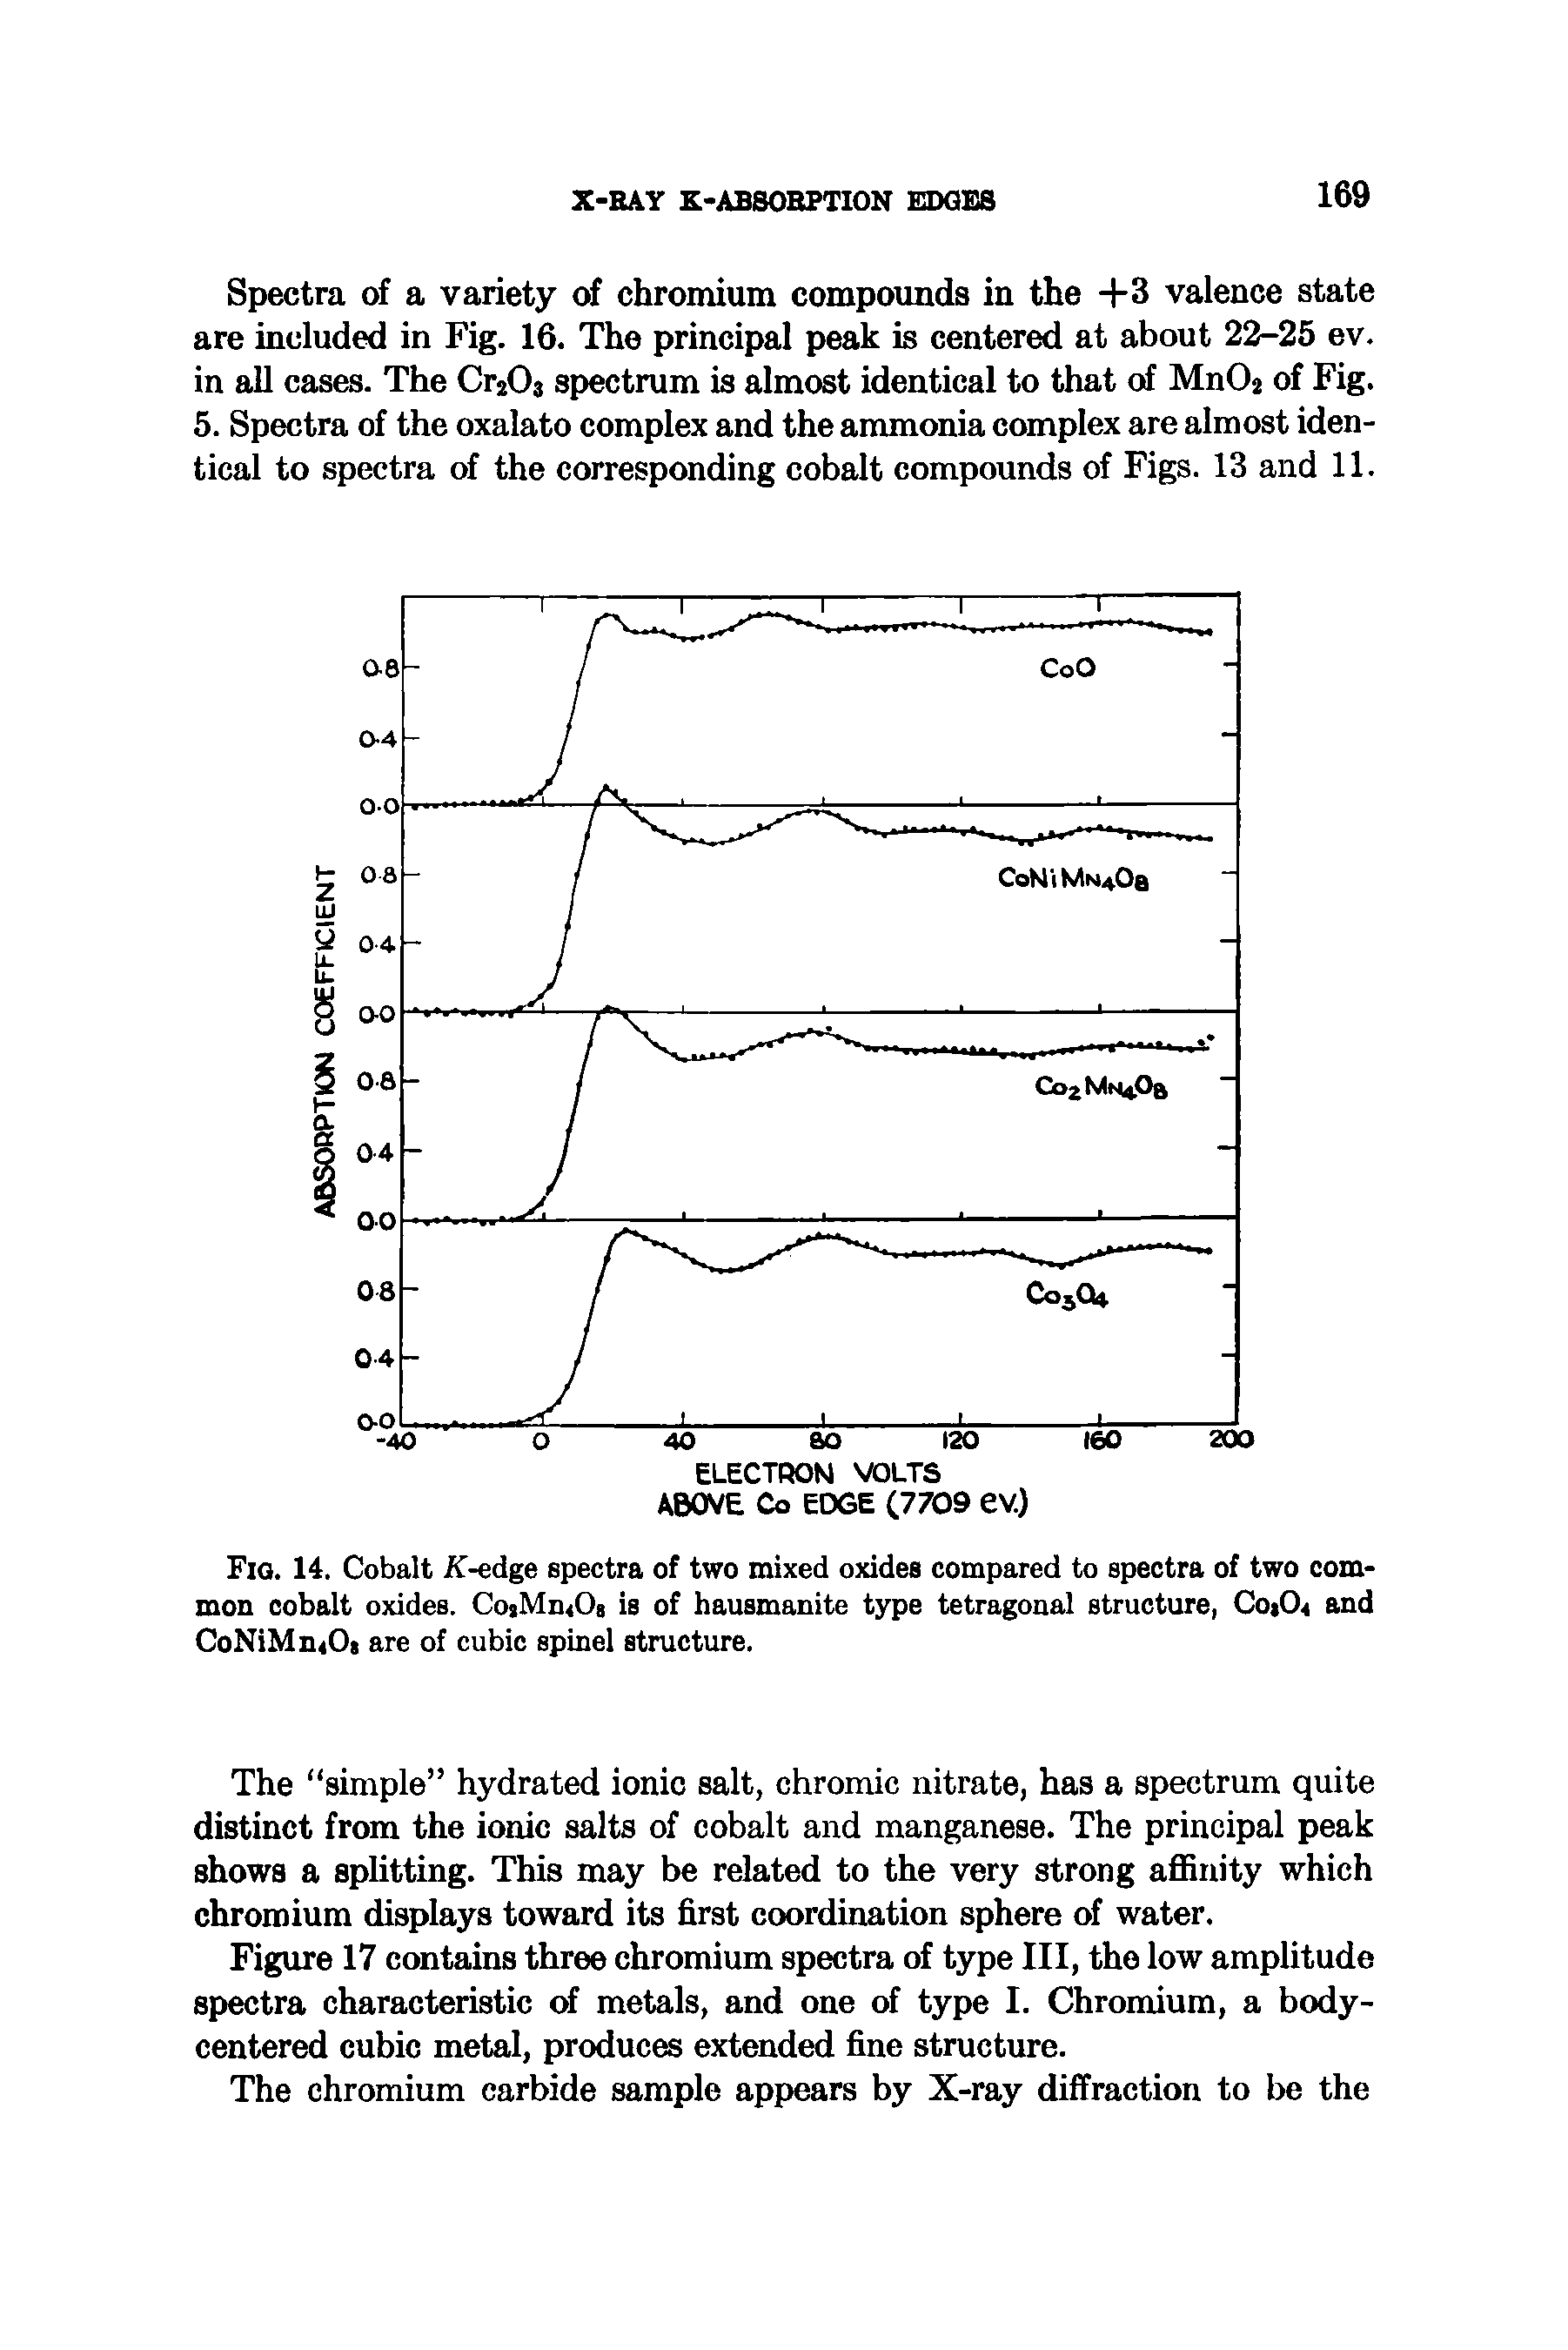 Fig. 14. Cobalt K-edge spectra of two mixed oxides compared to spectra of two common cobalt oxides. CoiMn40s is of hausmanite type tetragonal structure, CotO and CoNiMniOi are of cubic spinel structure.